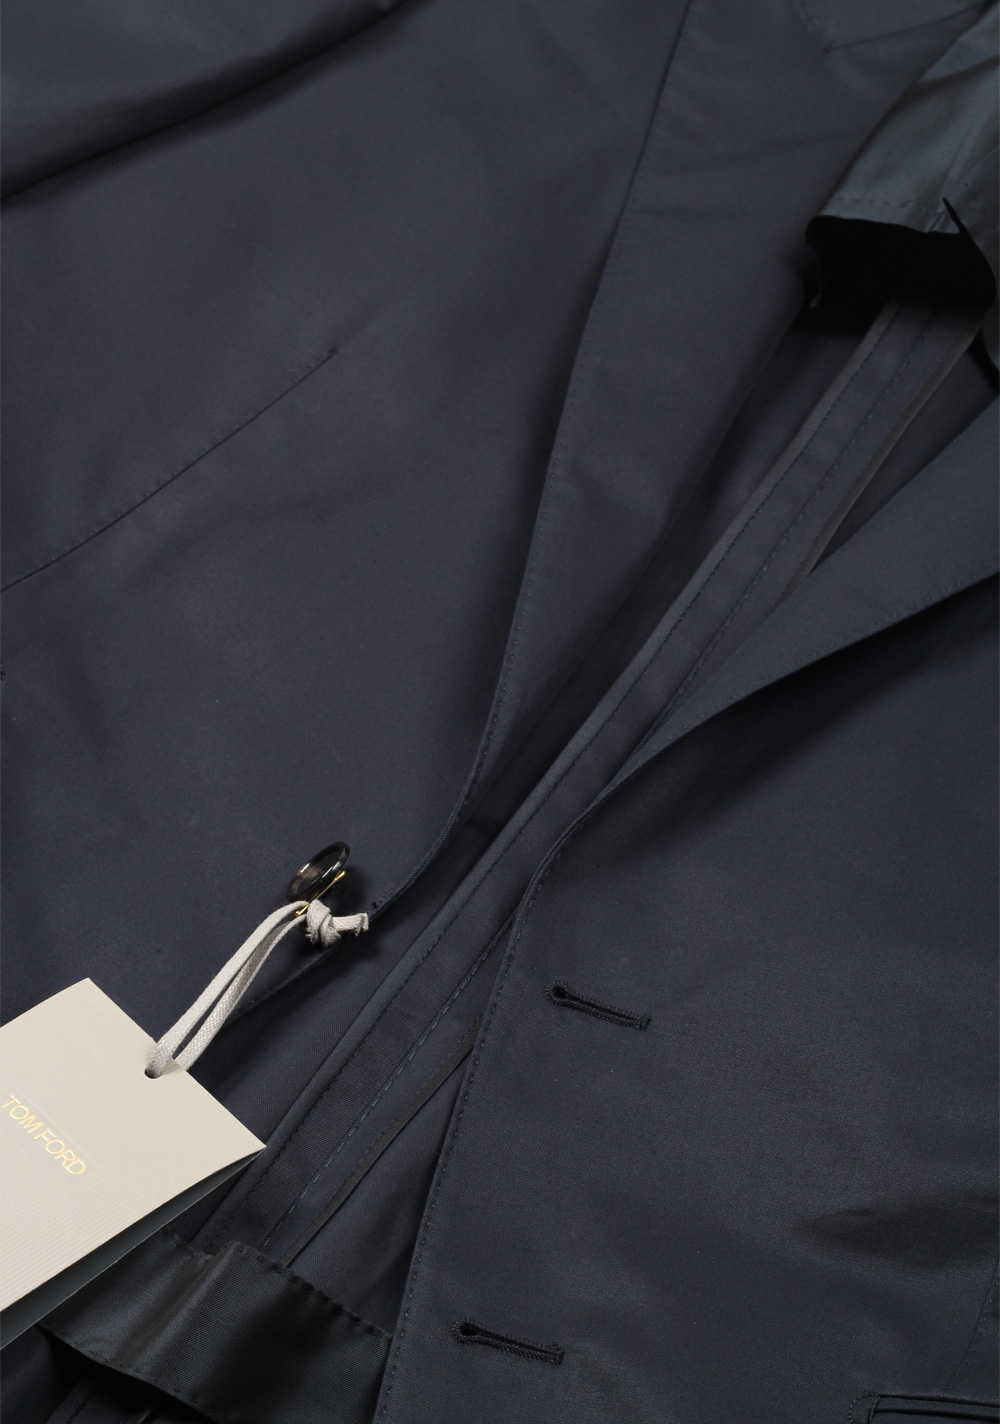 TOM FORD O’Connor Navy Suit Size 50 / 40R U.S. In Cotton Fit Y | Costume Limité